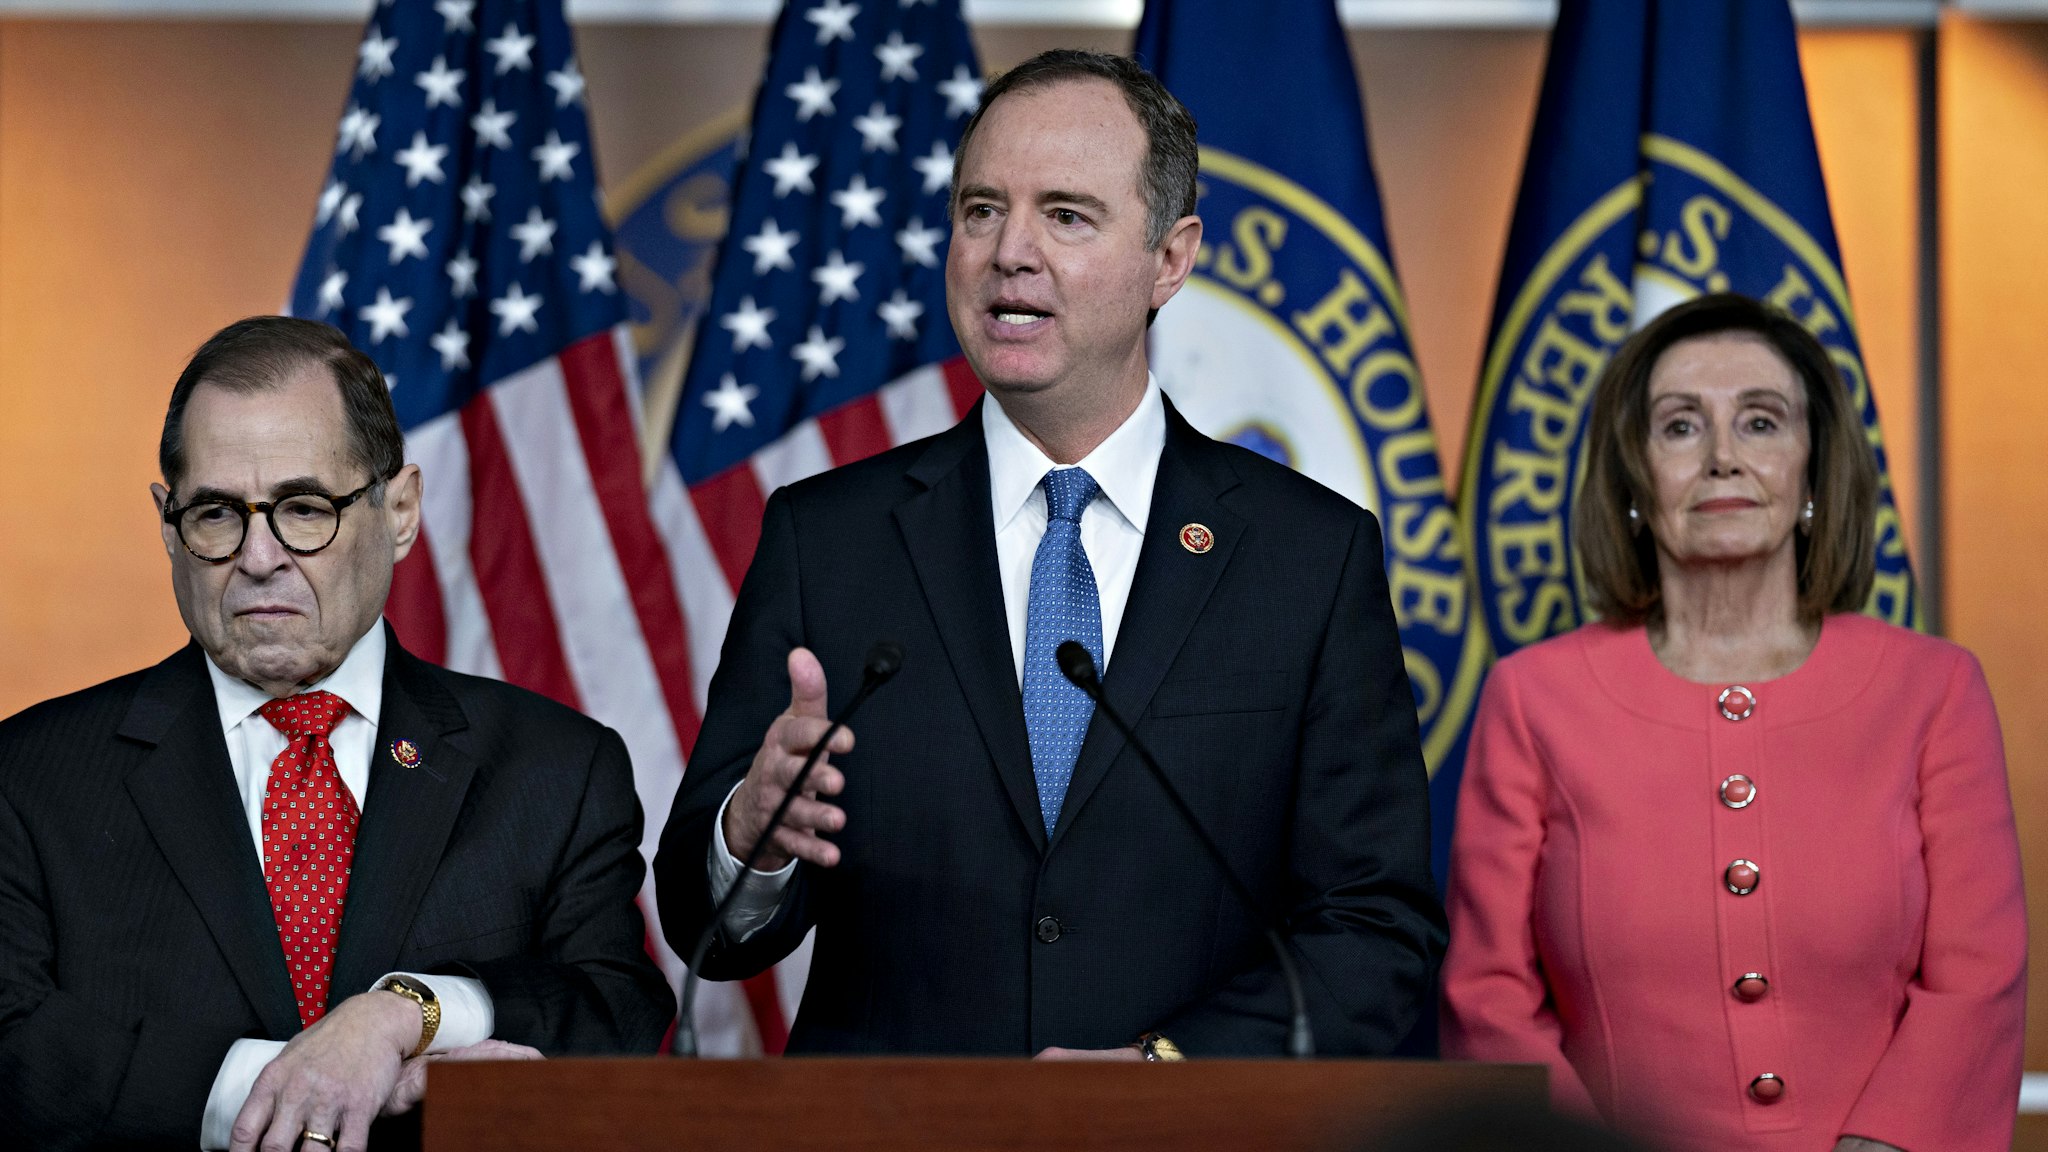 Representative Adam Schiff, a Democrat from California and chairman of the House Intelligence Committee, speaks as U.S. House Speaker Nancy Pelosi, a Democrat from California, right, and Representative Jerry Nadler, a Democrat from New York and chairman of the House Judiciary Committee, left, listen during a news conference on Capitol Hill in Washington, D.C., U.S., on Wednesday, Jan. 15, 2020. Schiff will lead a team of seven managers who will present the impeachment case against President Donald Trump in the Senate, Pelosi said. Photographer: Andrew Harrer/Bloomberg via Getty Images